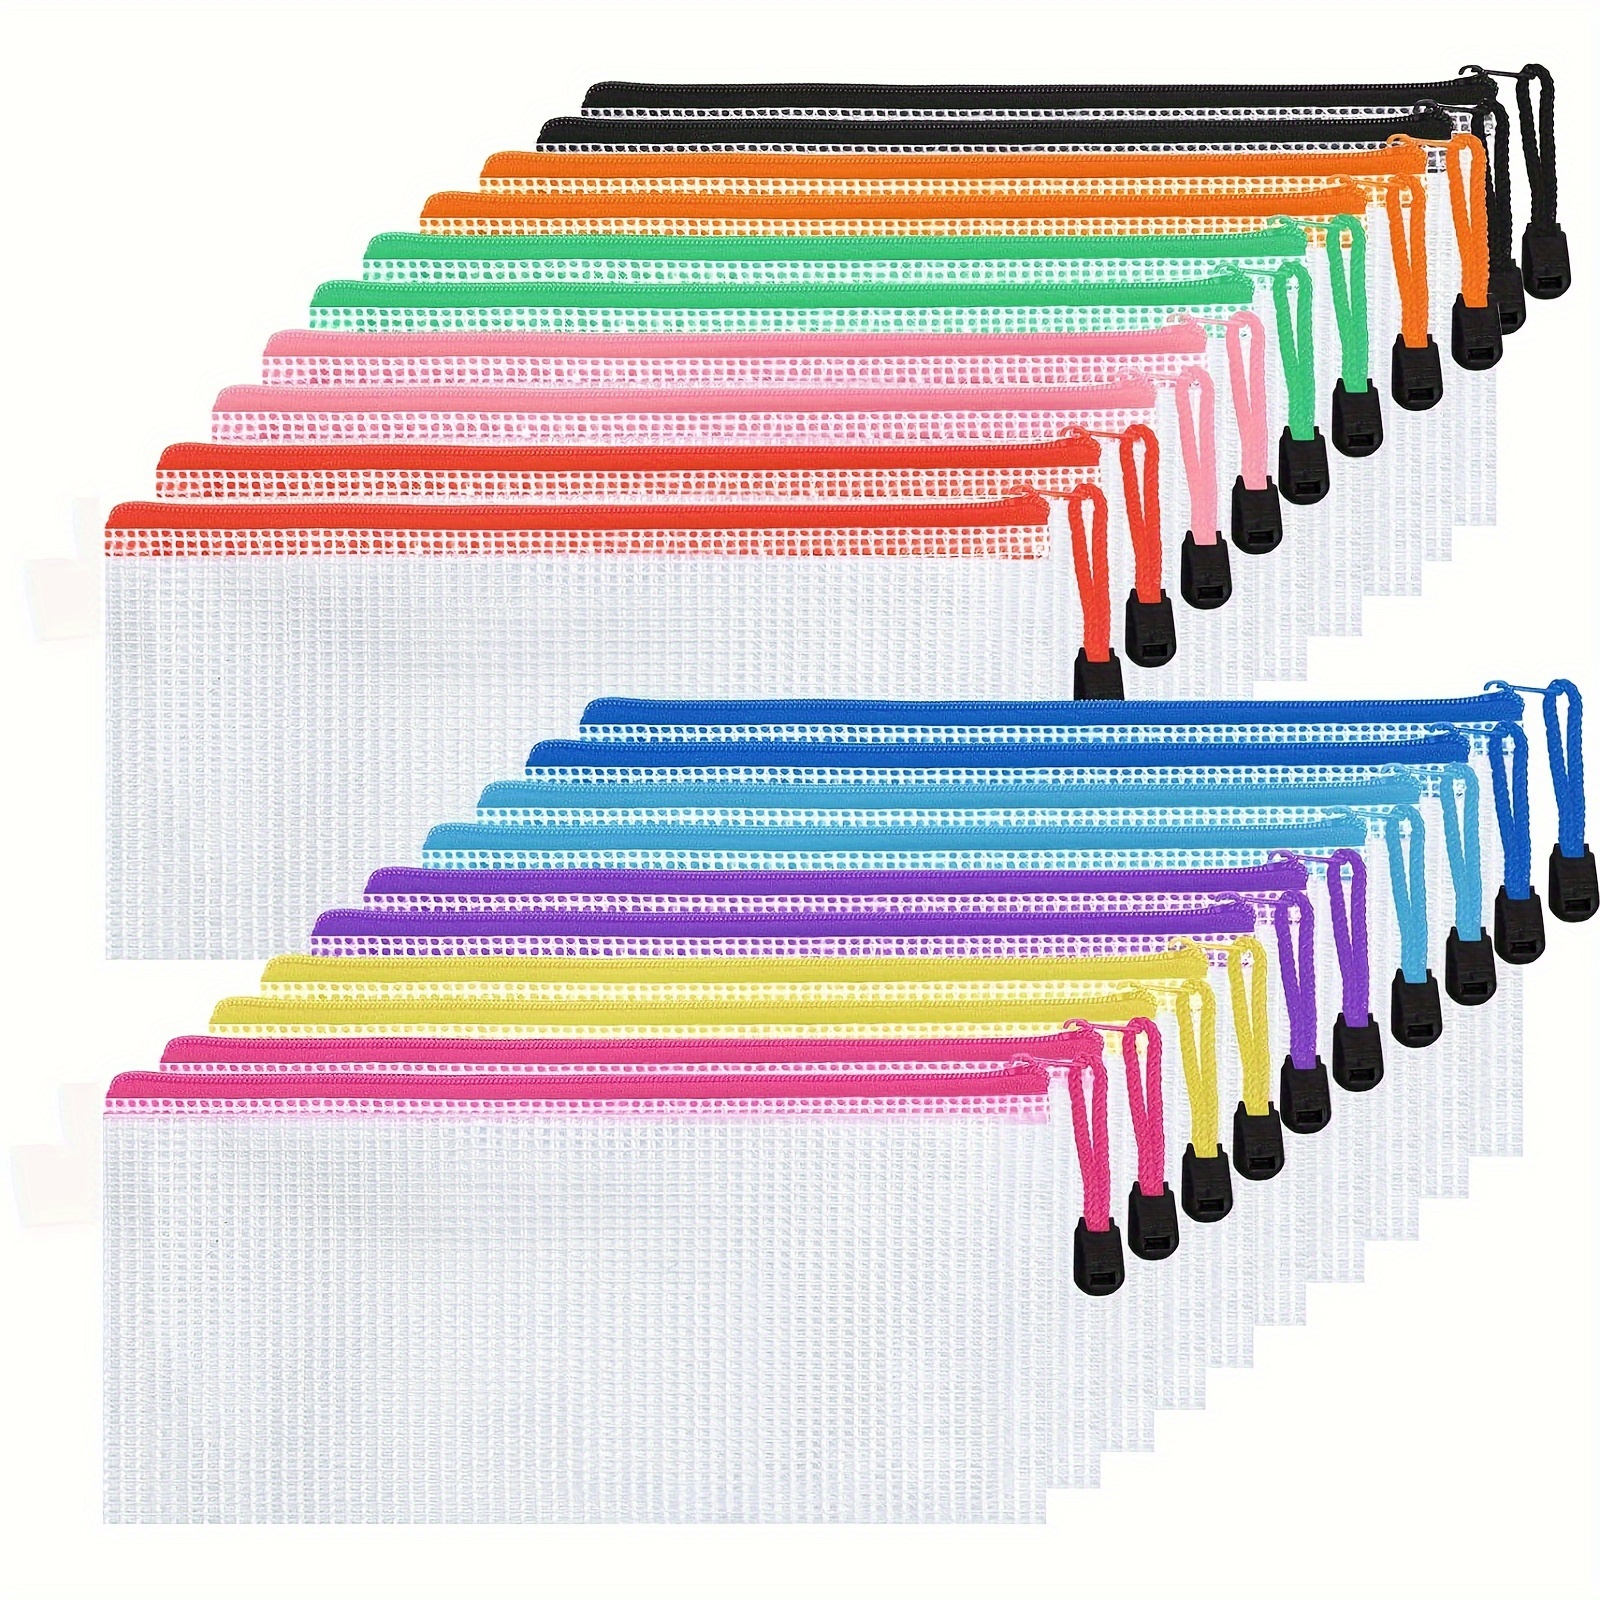 

20-pack A6 Size Waterproof Zipper Mesh Bags - Durable Pvc, Multi-color, Ideal For Classroom & Office Organization